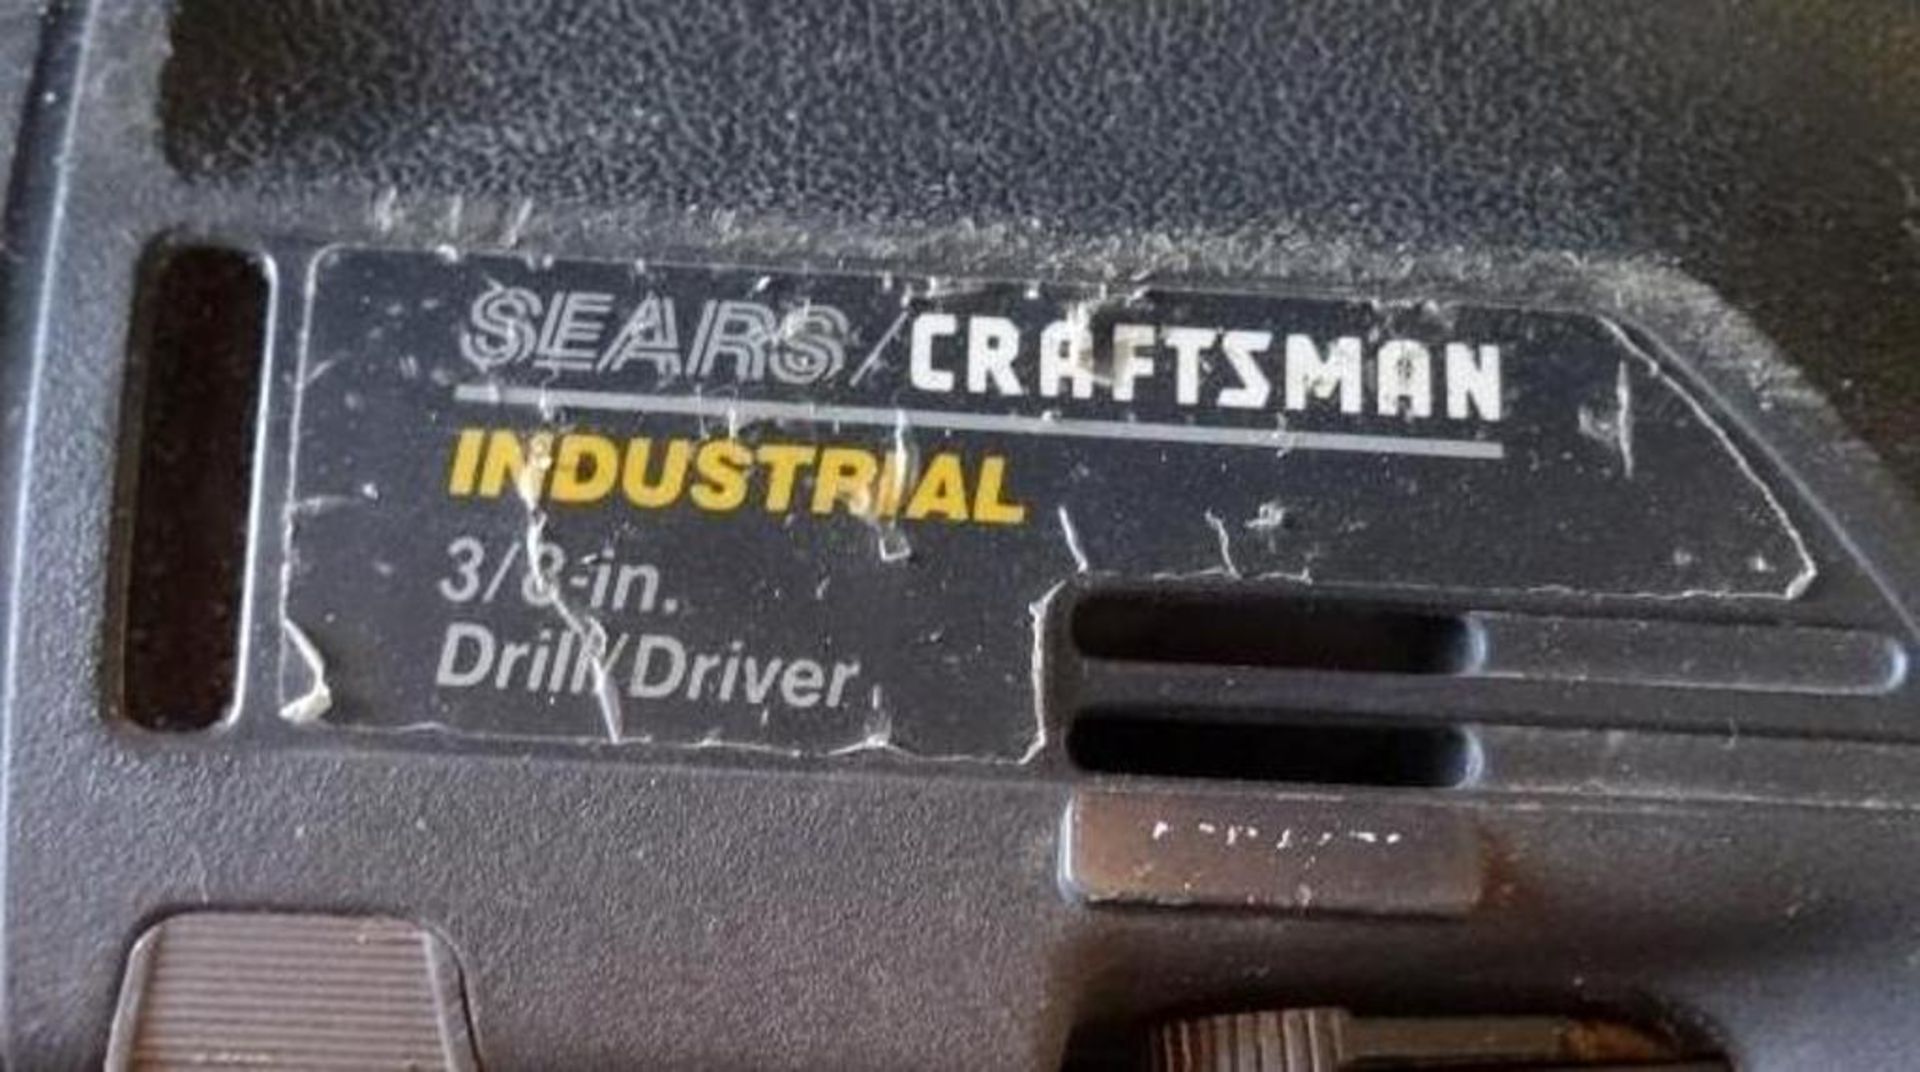 Sears/Craftsman 3/8" 14.4V Industrial Drill - Image 4 of 4